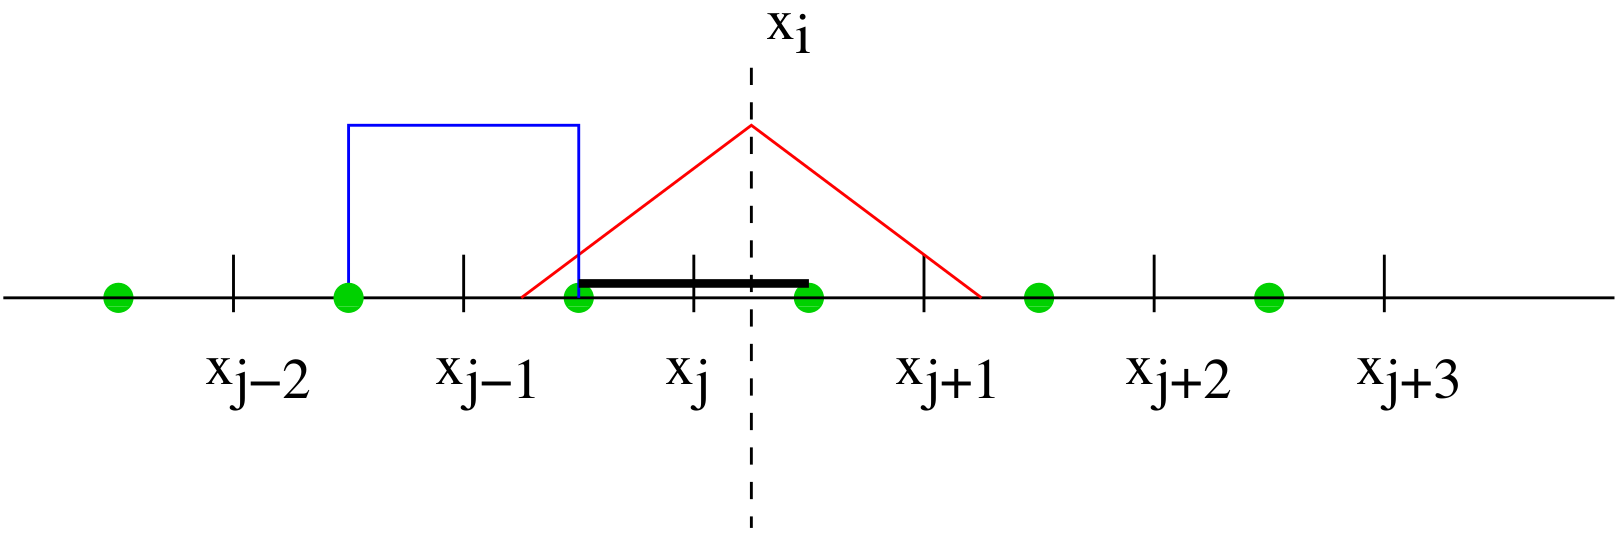 Second order particle shape function